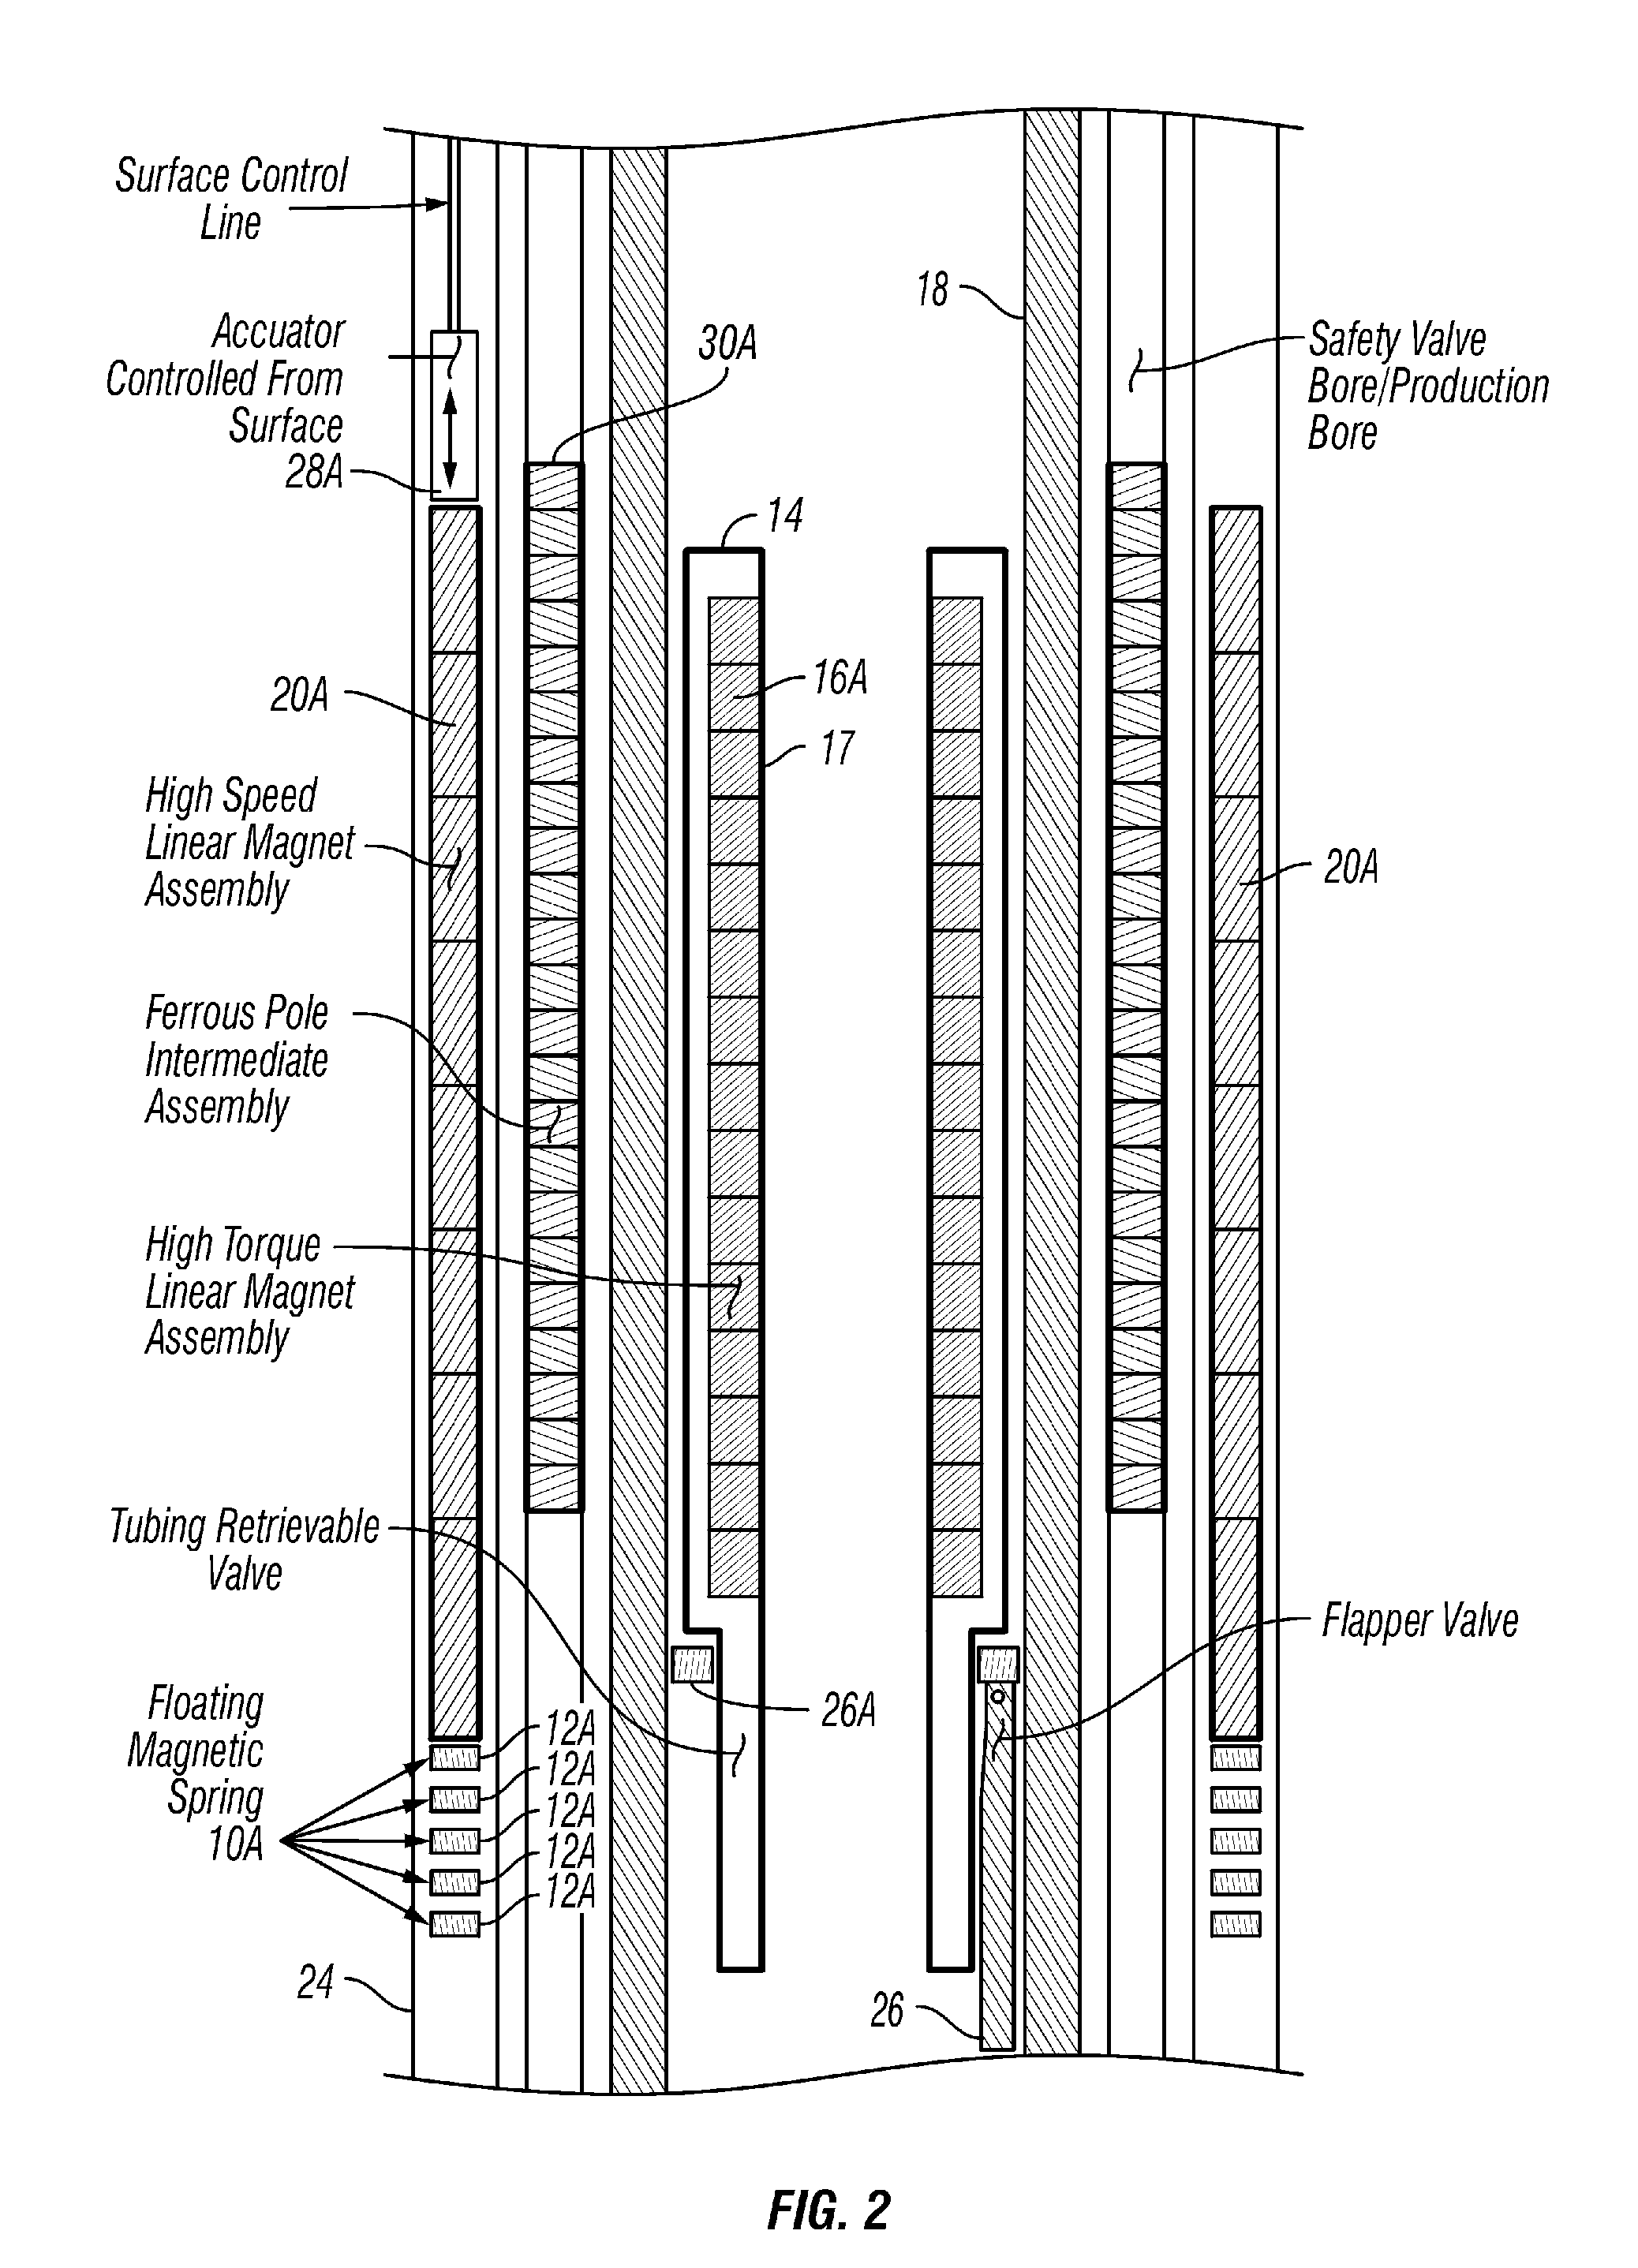 Wellbore Valve Having Linear Magnetically Geared Valve Actuator